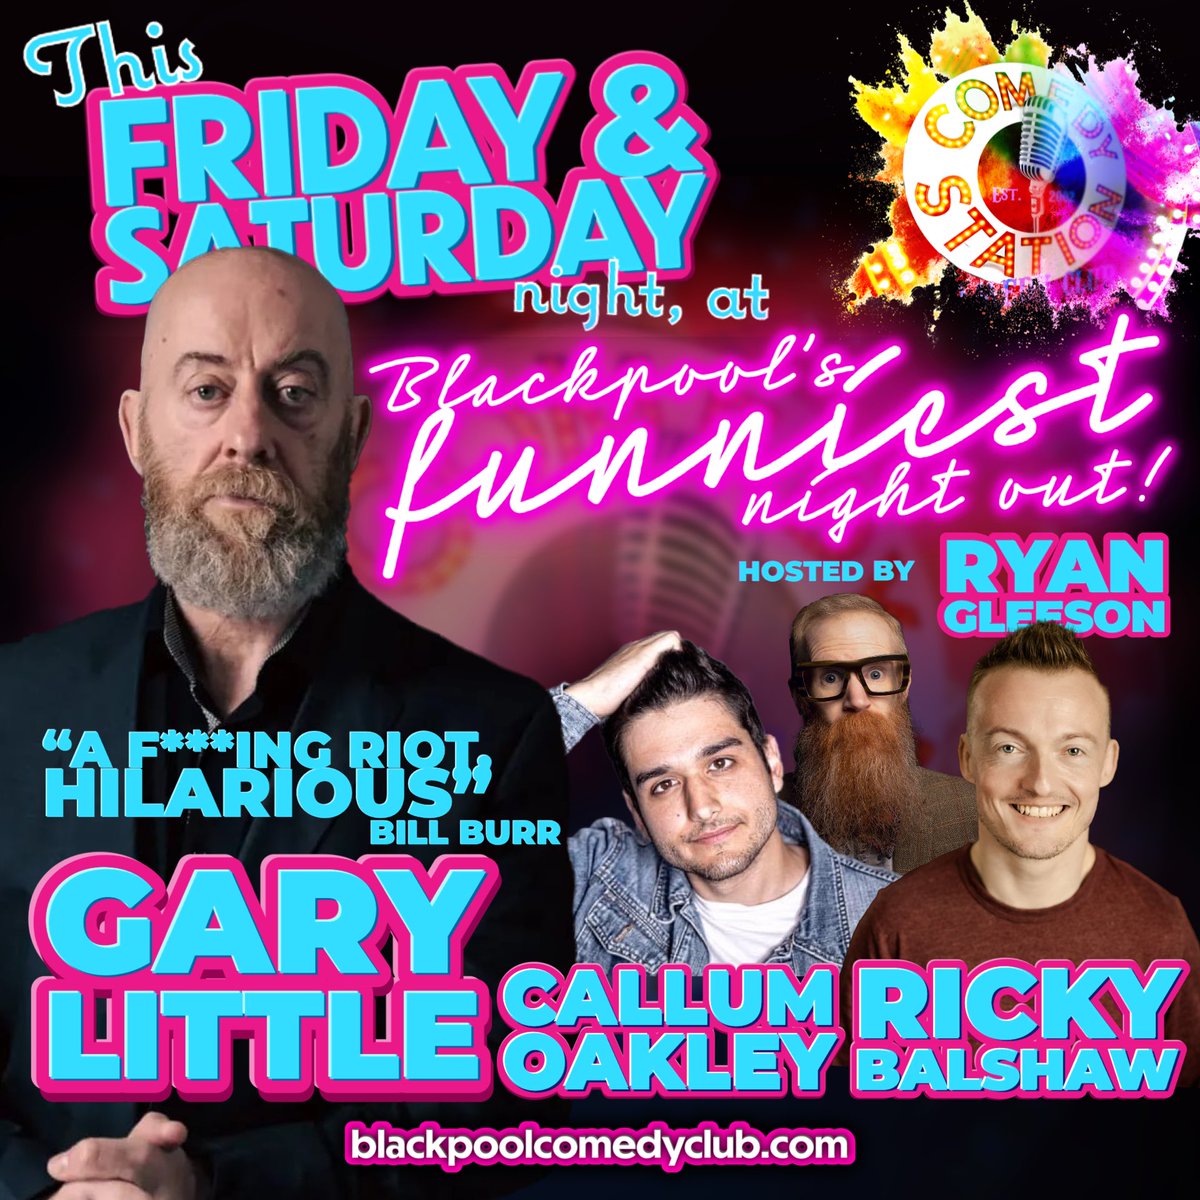 Another belting weekend of comedy for you lucky people of the Fylde Coast, this Friday & Saturday night! Tix & info: blackpoolcomedyclub.com Doors 7pm - Shows 8pm